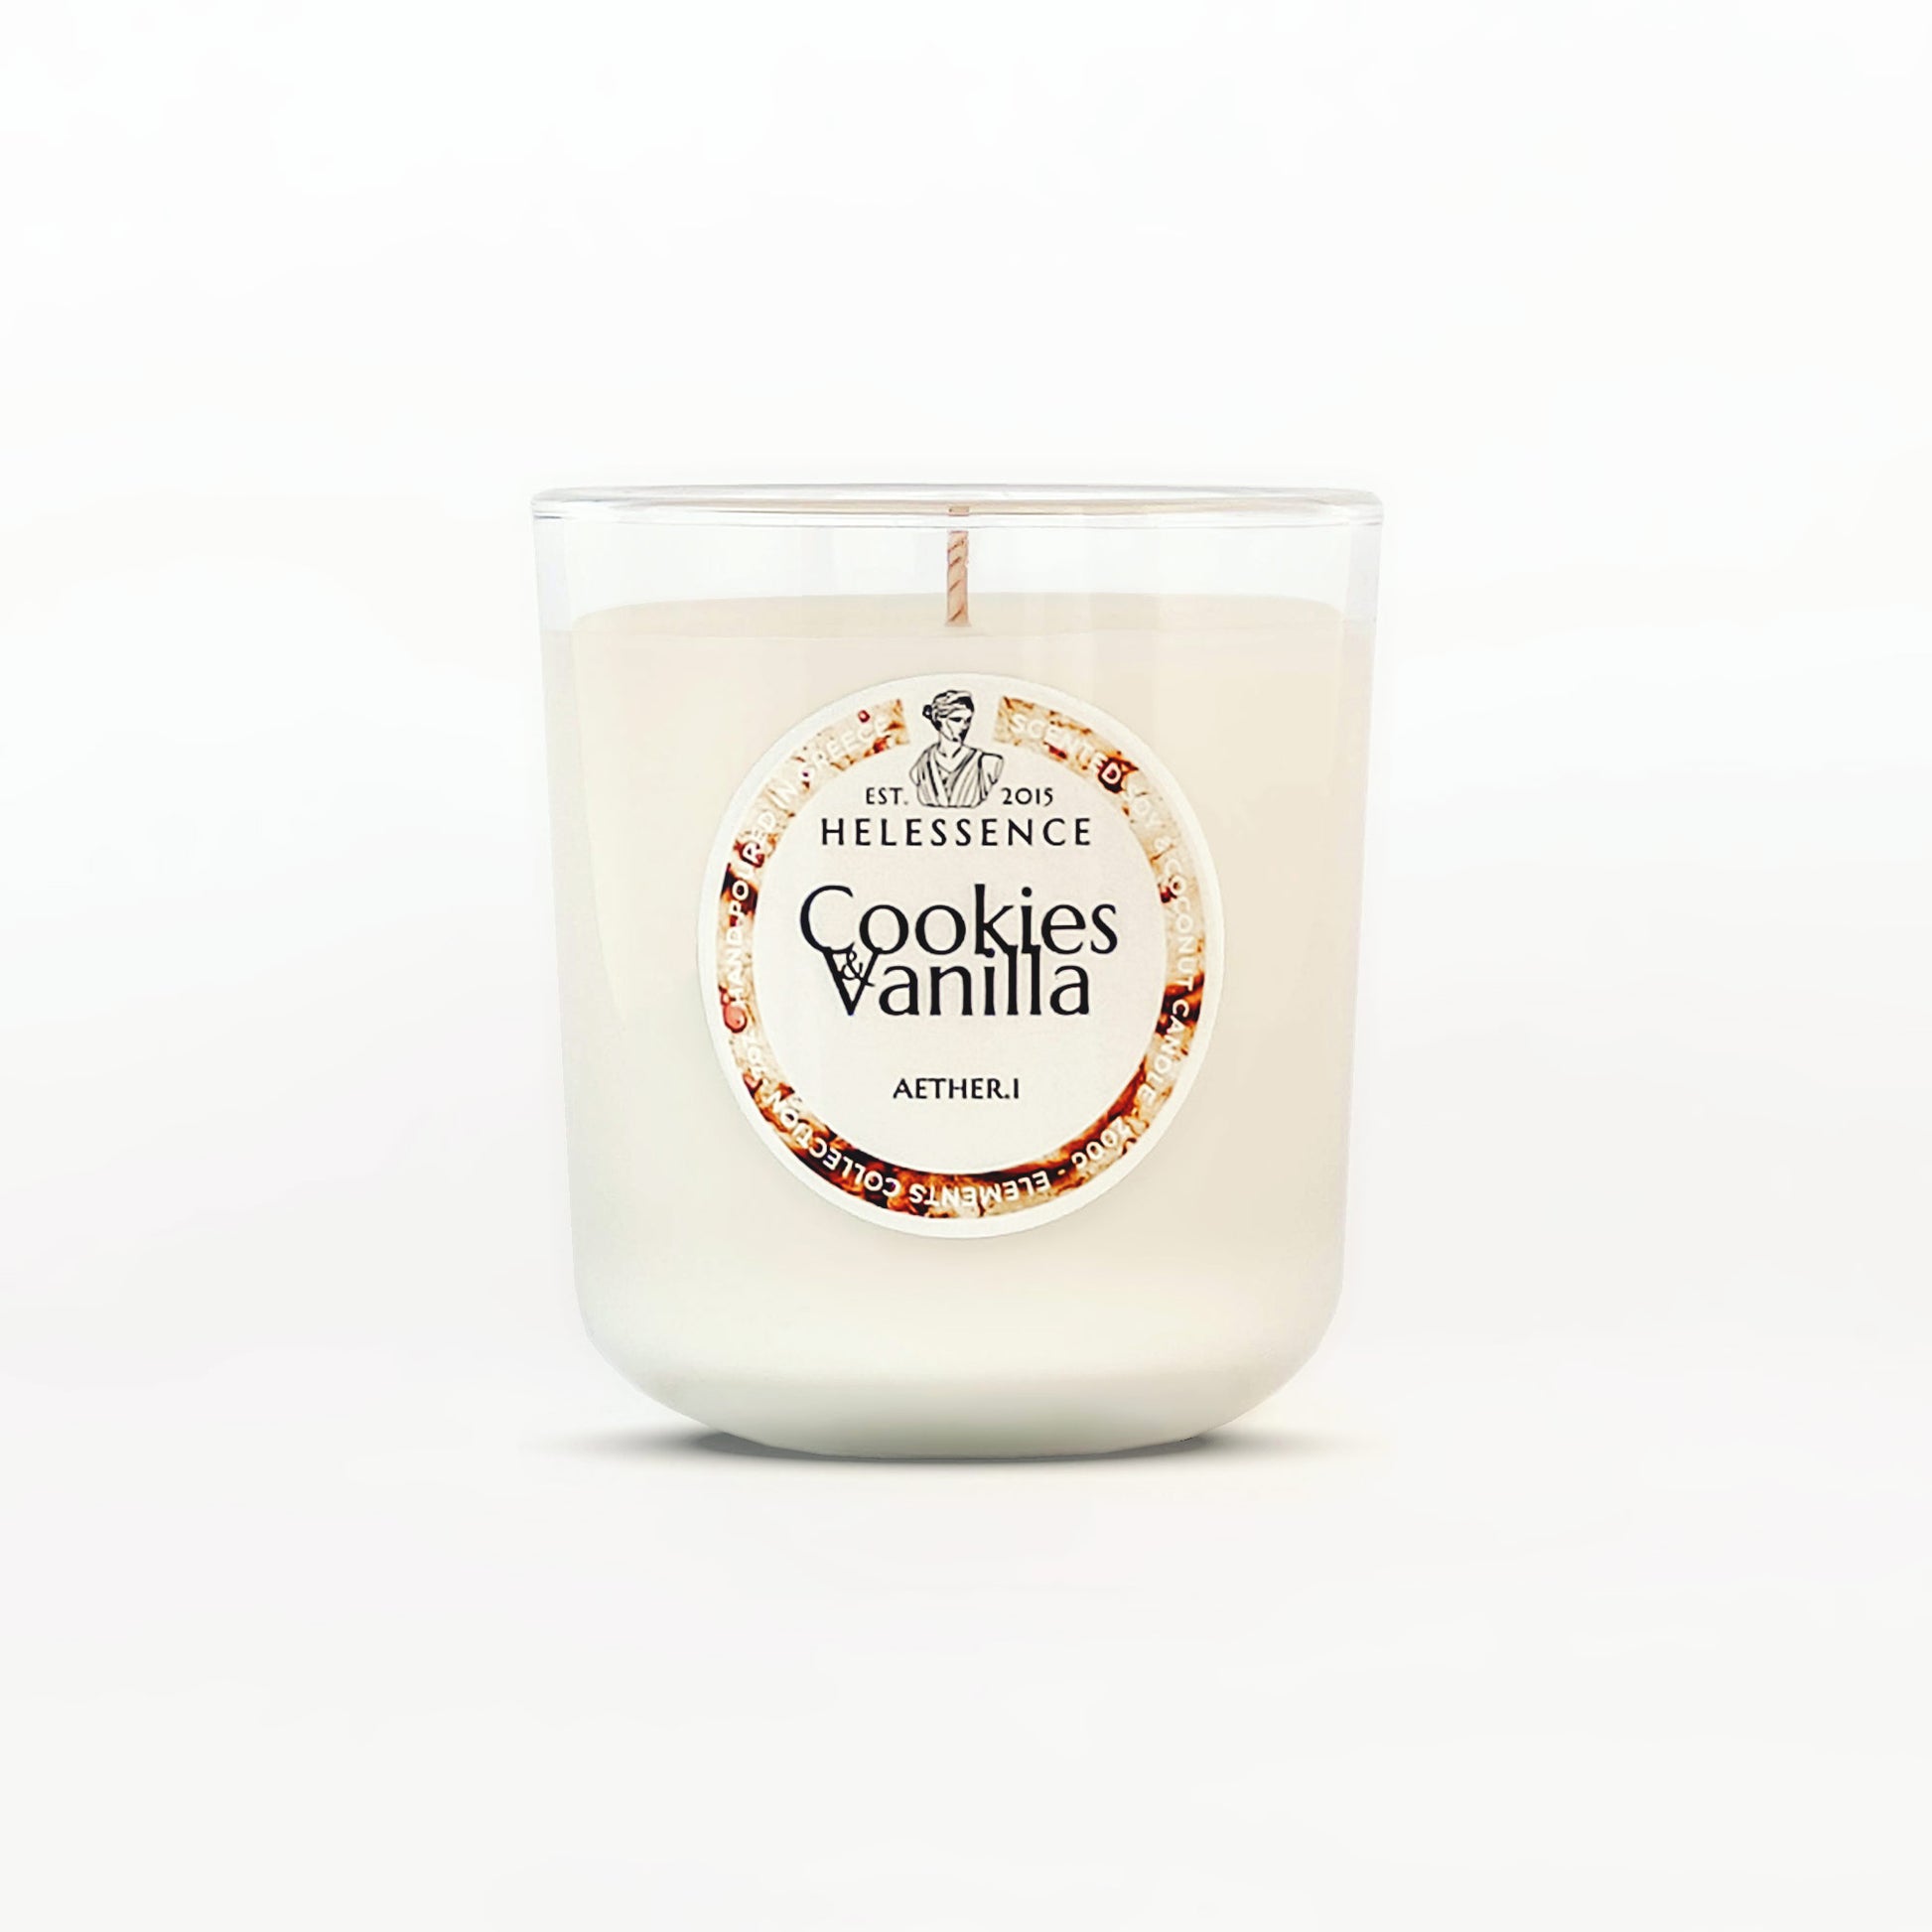 Cookies & Vanilla Scented Candle